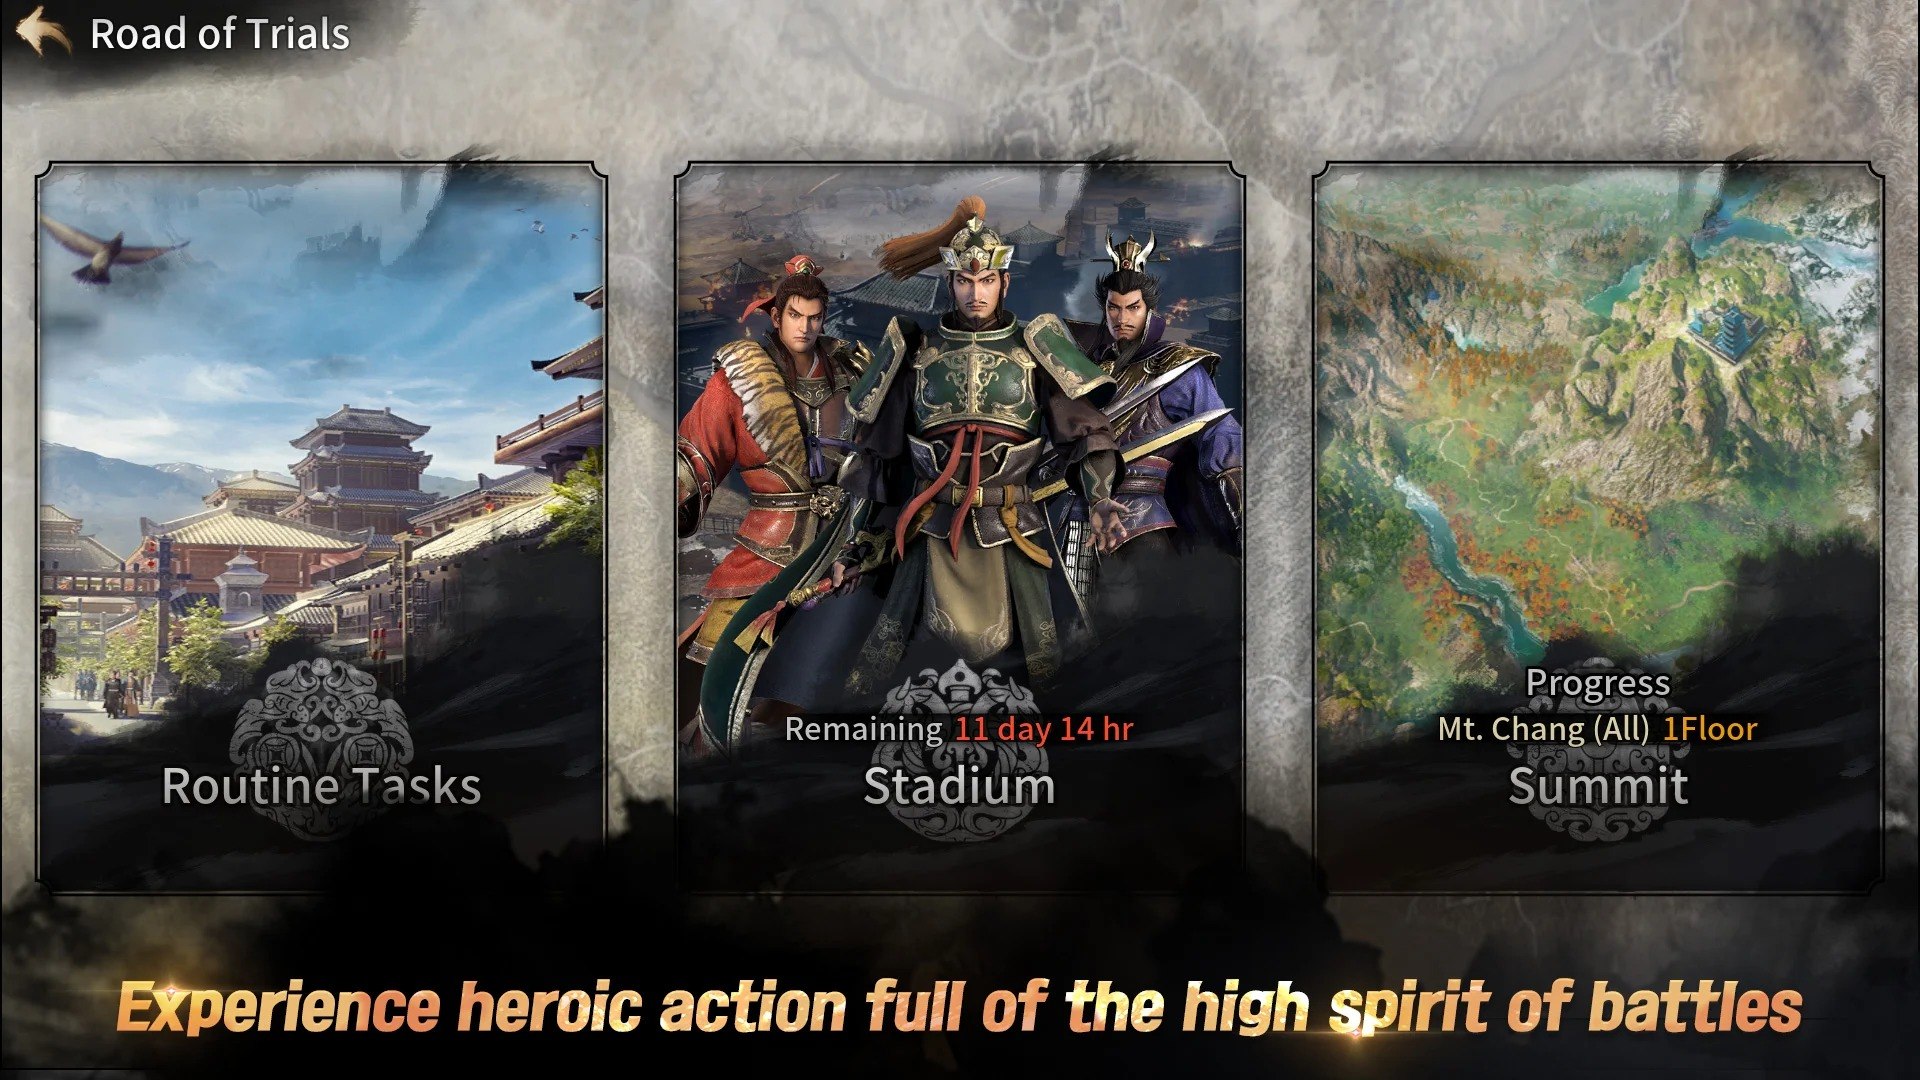 Nexon and Koei Tecmo Unveil Dynasty Warriors M Soft Launch in Select Regions